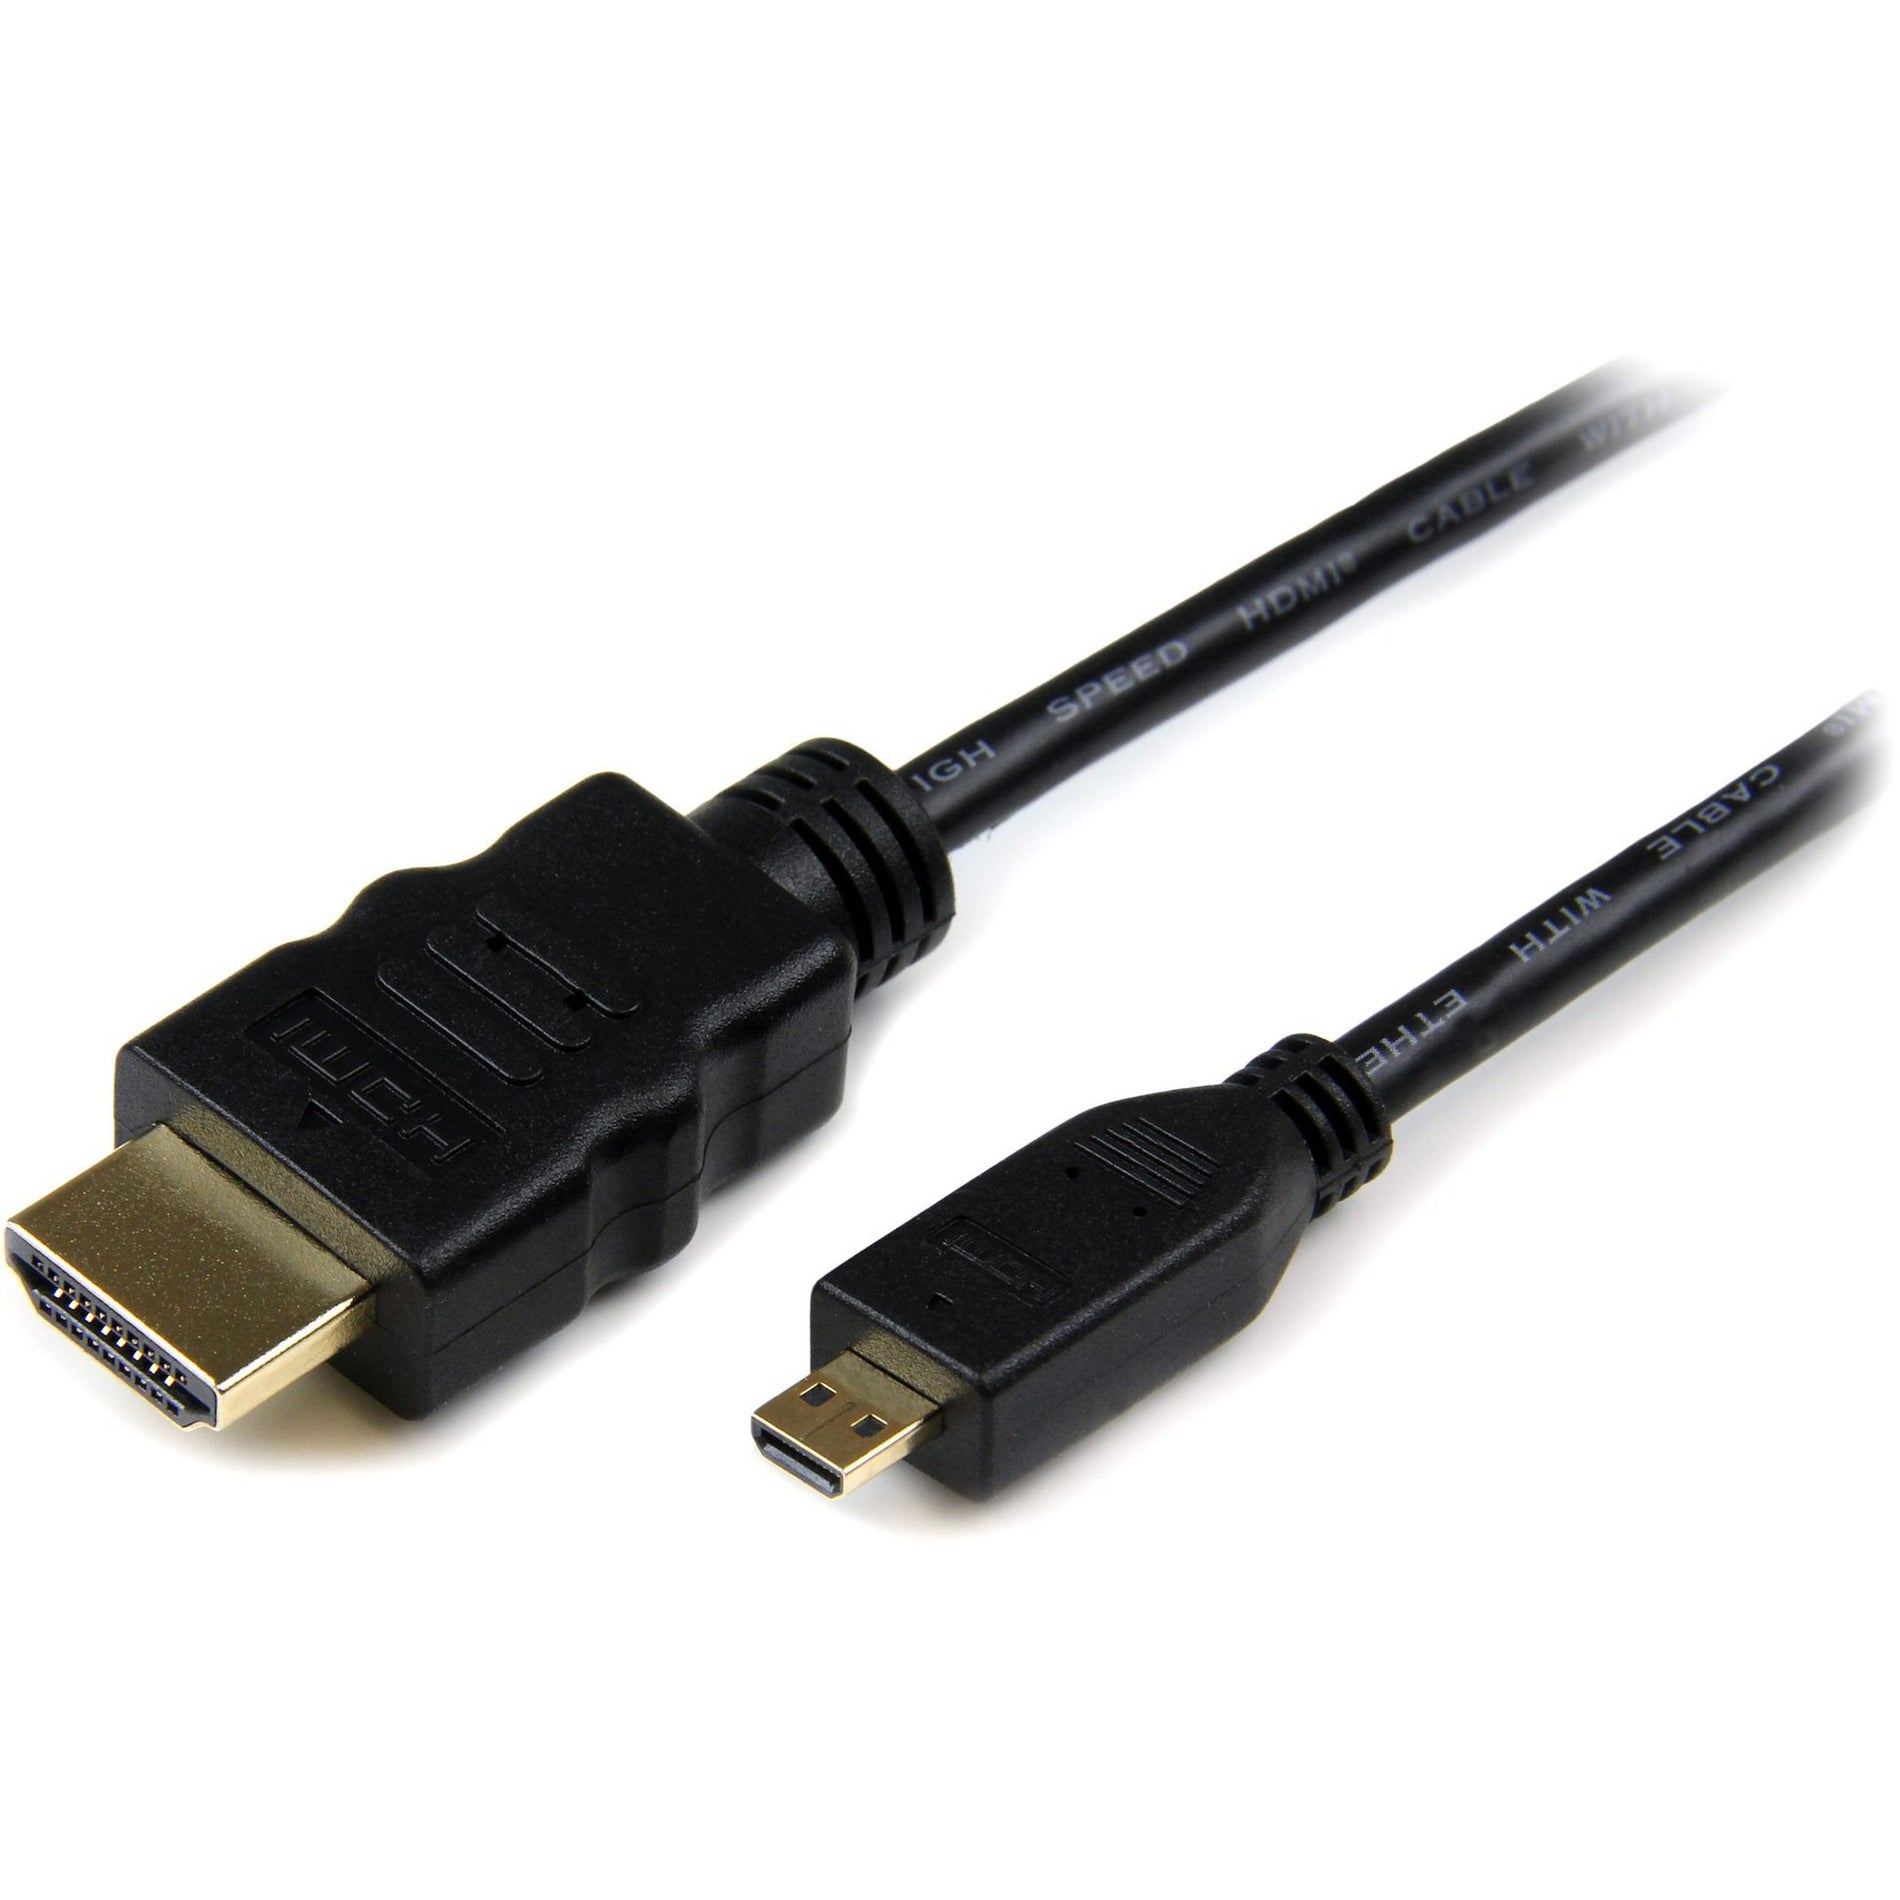 StarTech.com HDMIADMM3 3 ft High Speed HDMI Cable with Ethernet - HDMI to HDMI Micro - M/M 4K Supported Gold Plated Connectors Black Startech.com HDMIADMM3 3フィート ハイスピード HDMIケーブル イーサネット対応 - HDMI to HDMI Micro - M/M 4K対応 ゴールドプレーテッドコネクタ ブラック